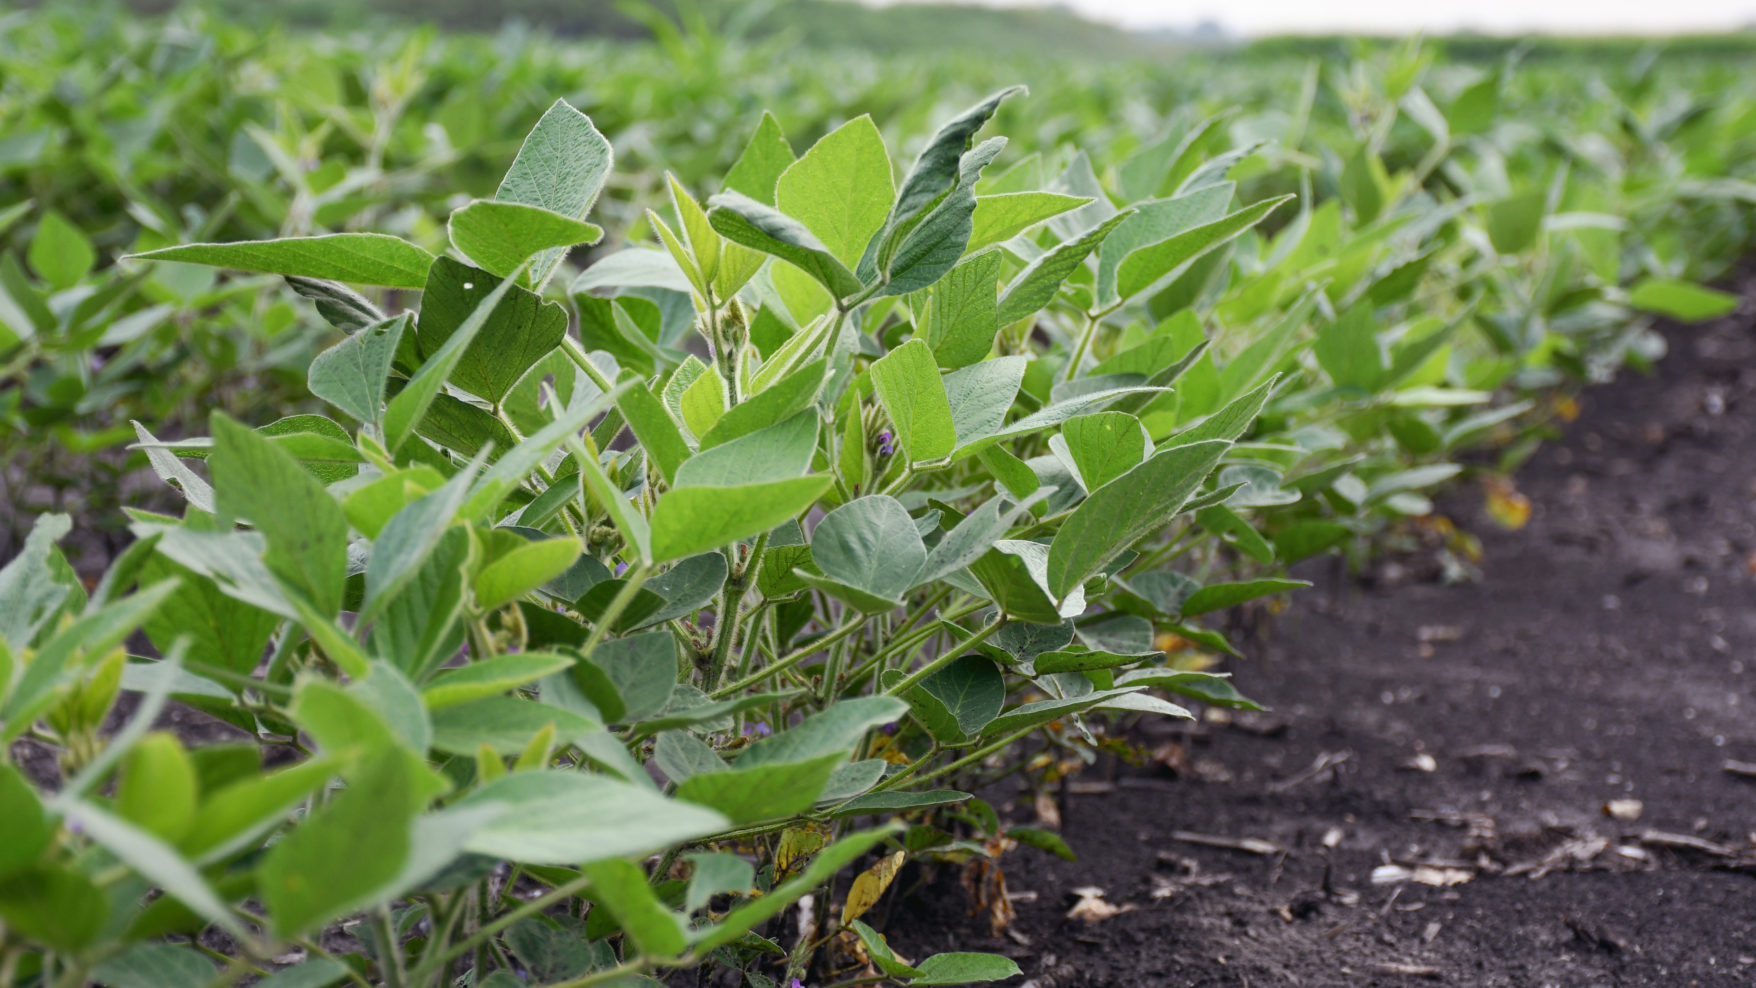 Photograph of a soy bean row in a field